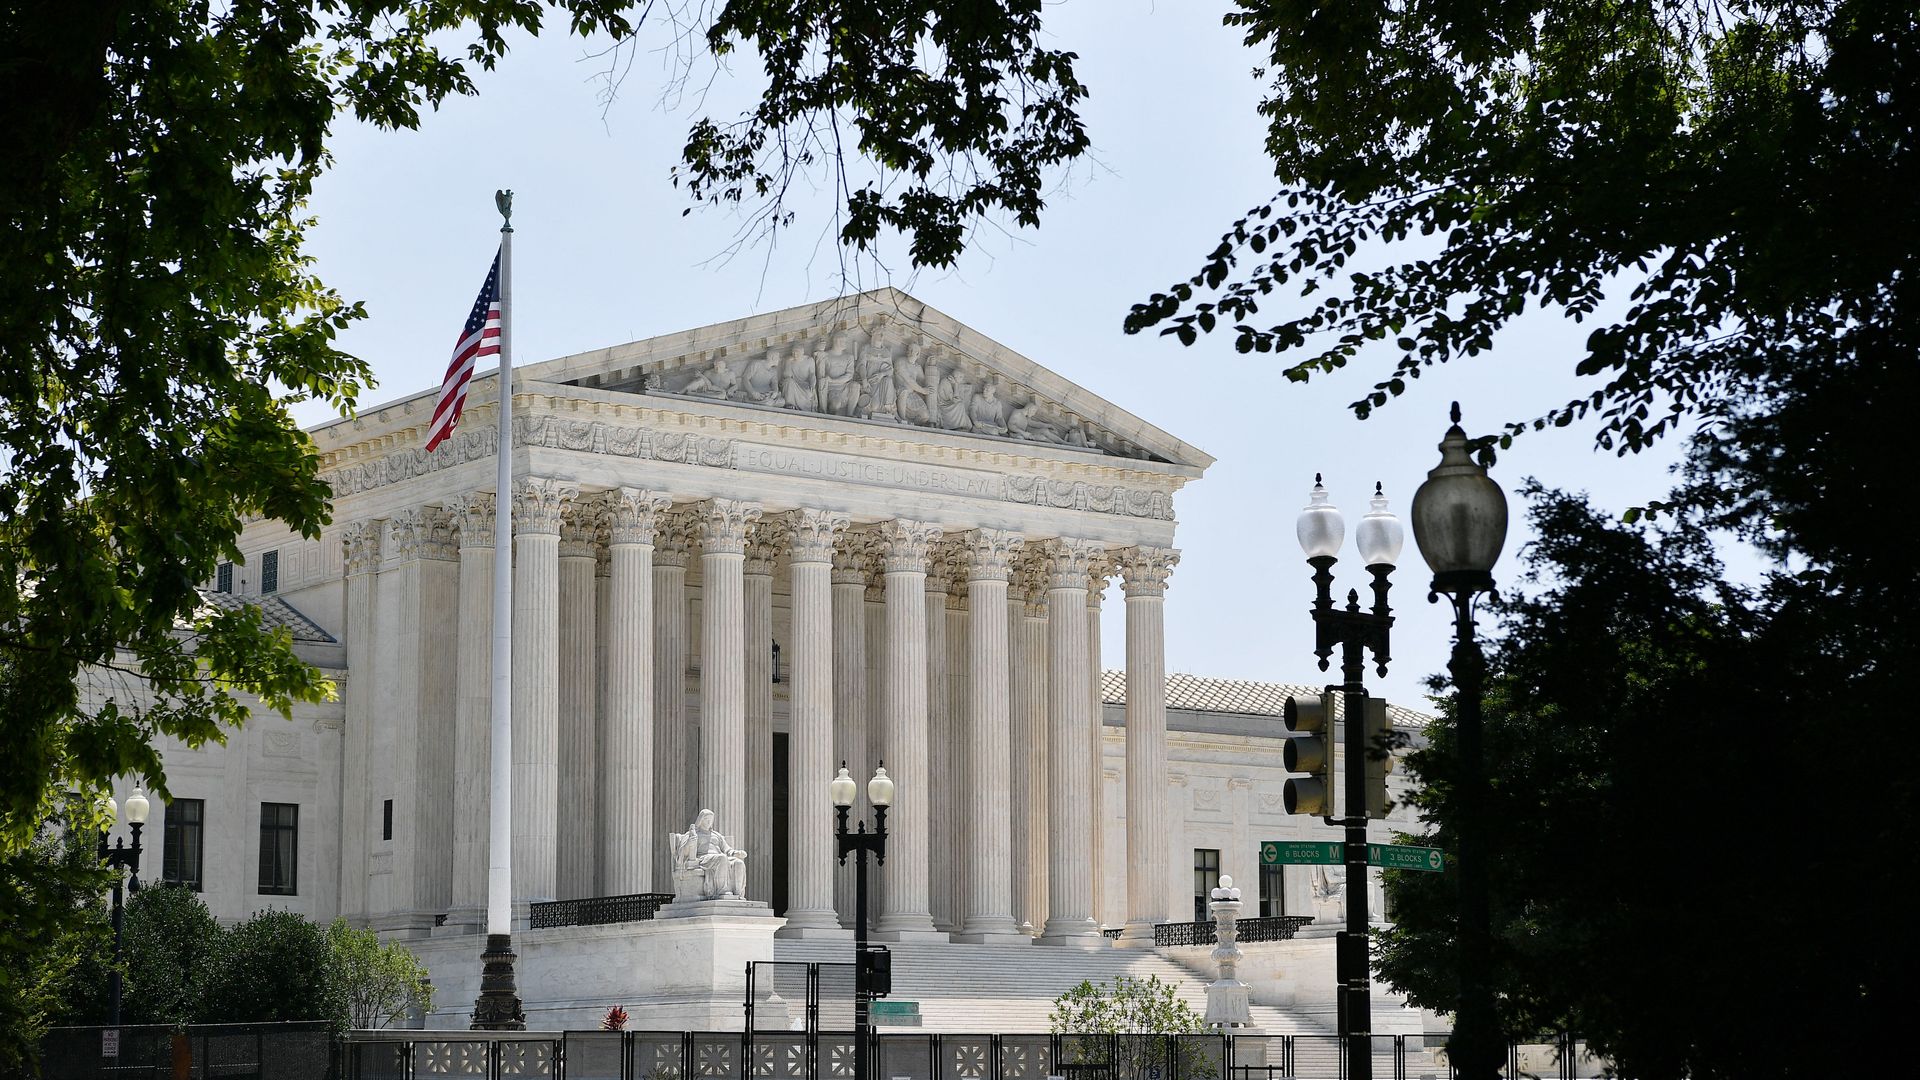 The US Supreme Court is seen in Washington, DC on July 24, 2022.